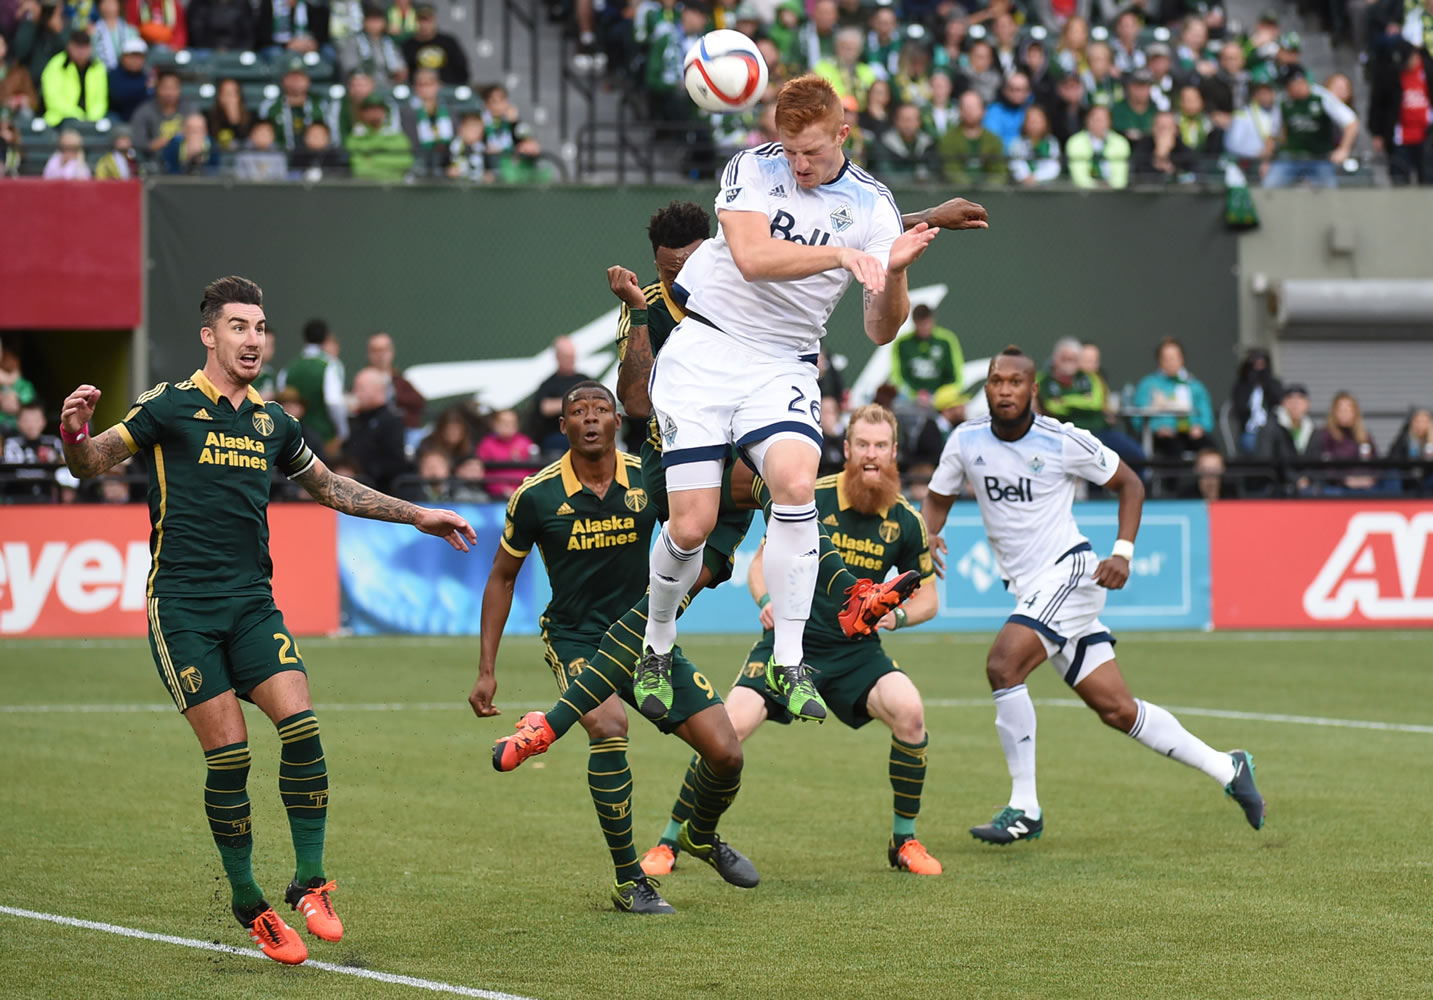 Vancouver Whitecaps defender Tim Parker (26) goes up for a corner kick during the first half of an MLS western conference semifinal soccer match against the Portland Timbers in Portland, Ore., Sunday, Nov. 1, 2015. .